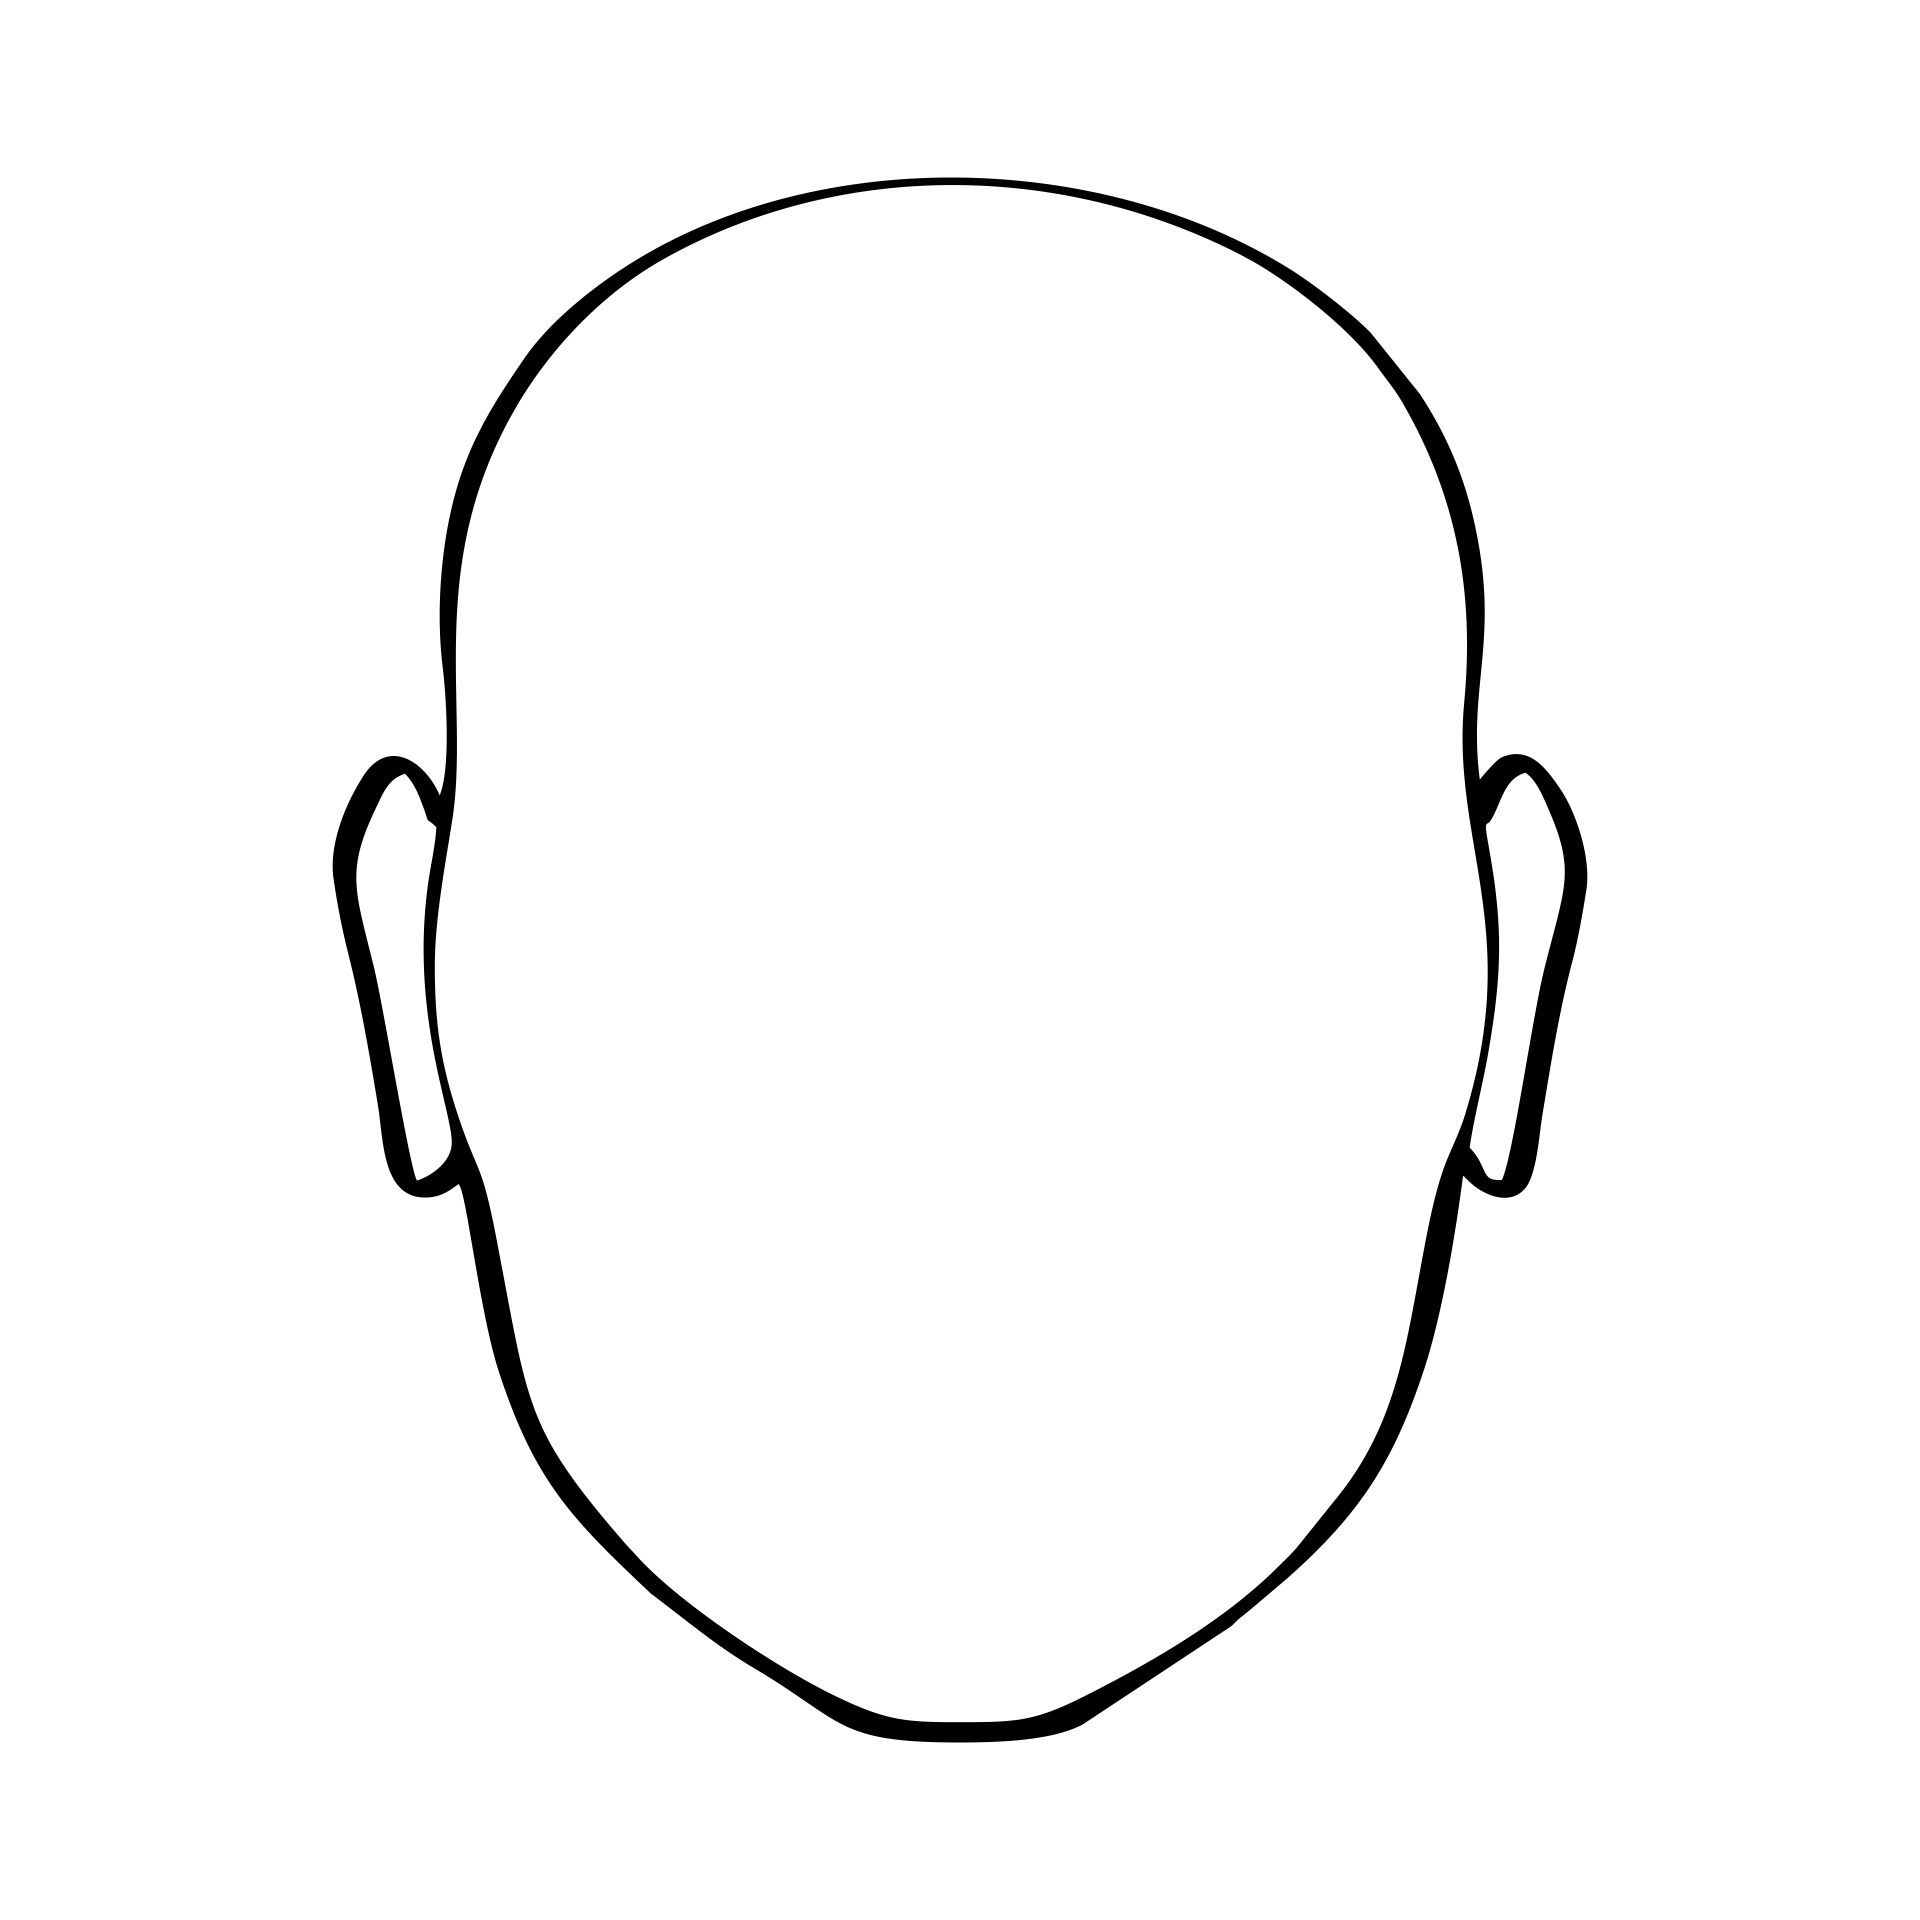 6 Best Images of Head Template Printable Human Head Outline Template